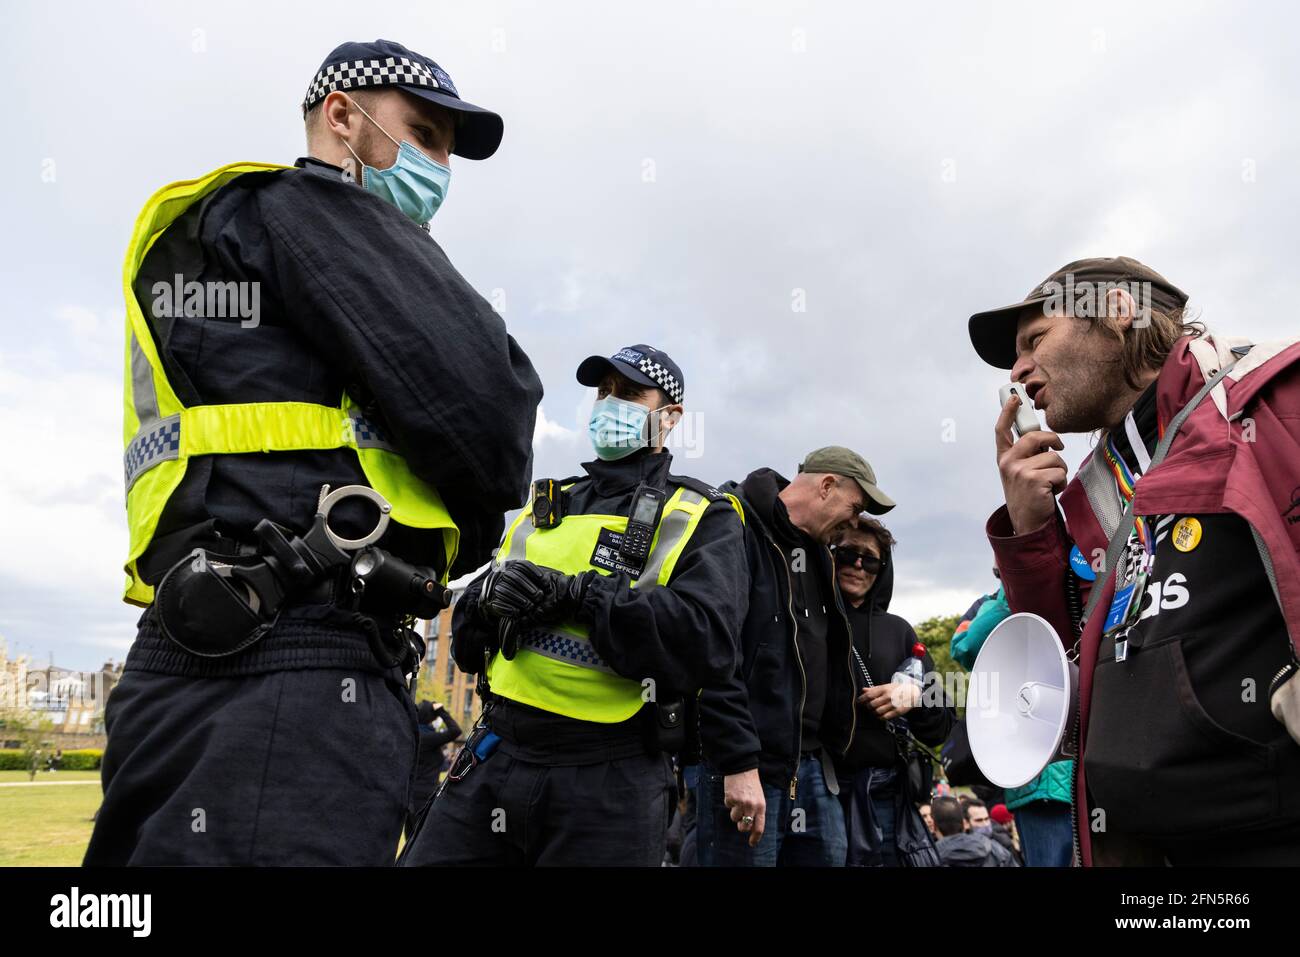 Protester with megaphone confronts police at a 'Kill the Bill' protest against new policing bill, London, 1 May 2021 Stock Photo